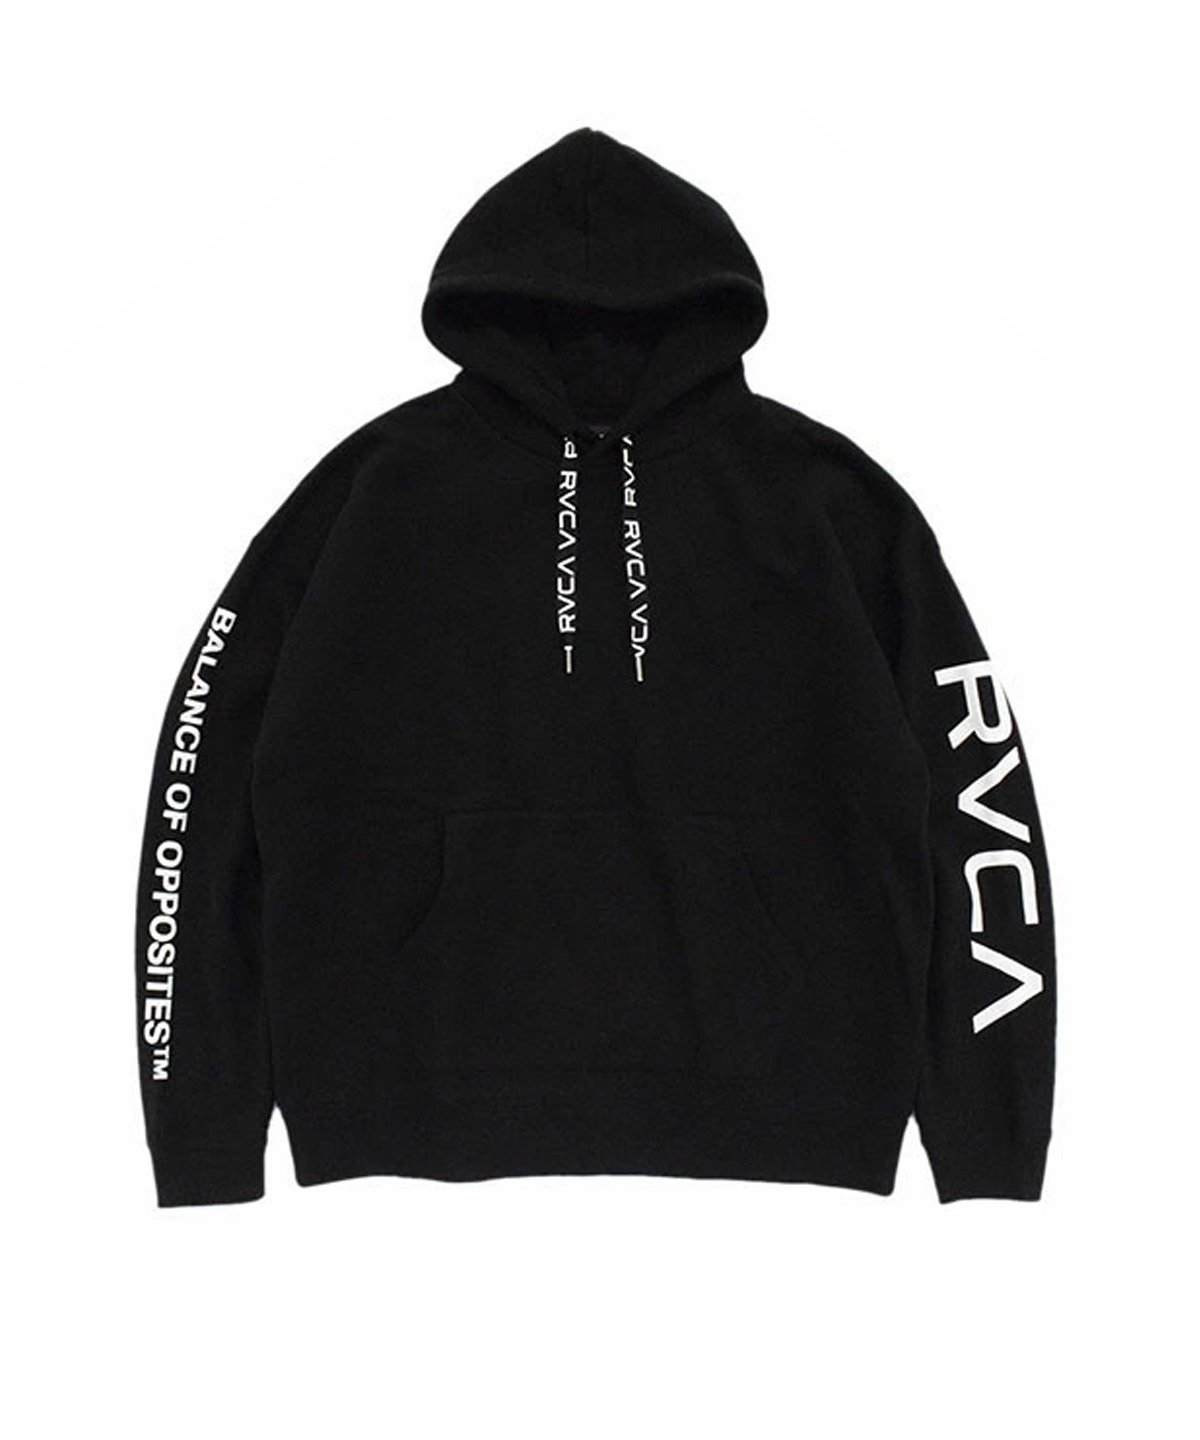 RVCA (ルーカ） RVCA メンズ FAT LACE RVCA HD パーカー【2021年秋冬モデル】BLK M's by  FLASHBACK公式通販サイト